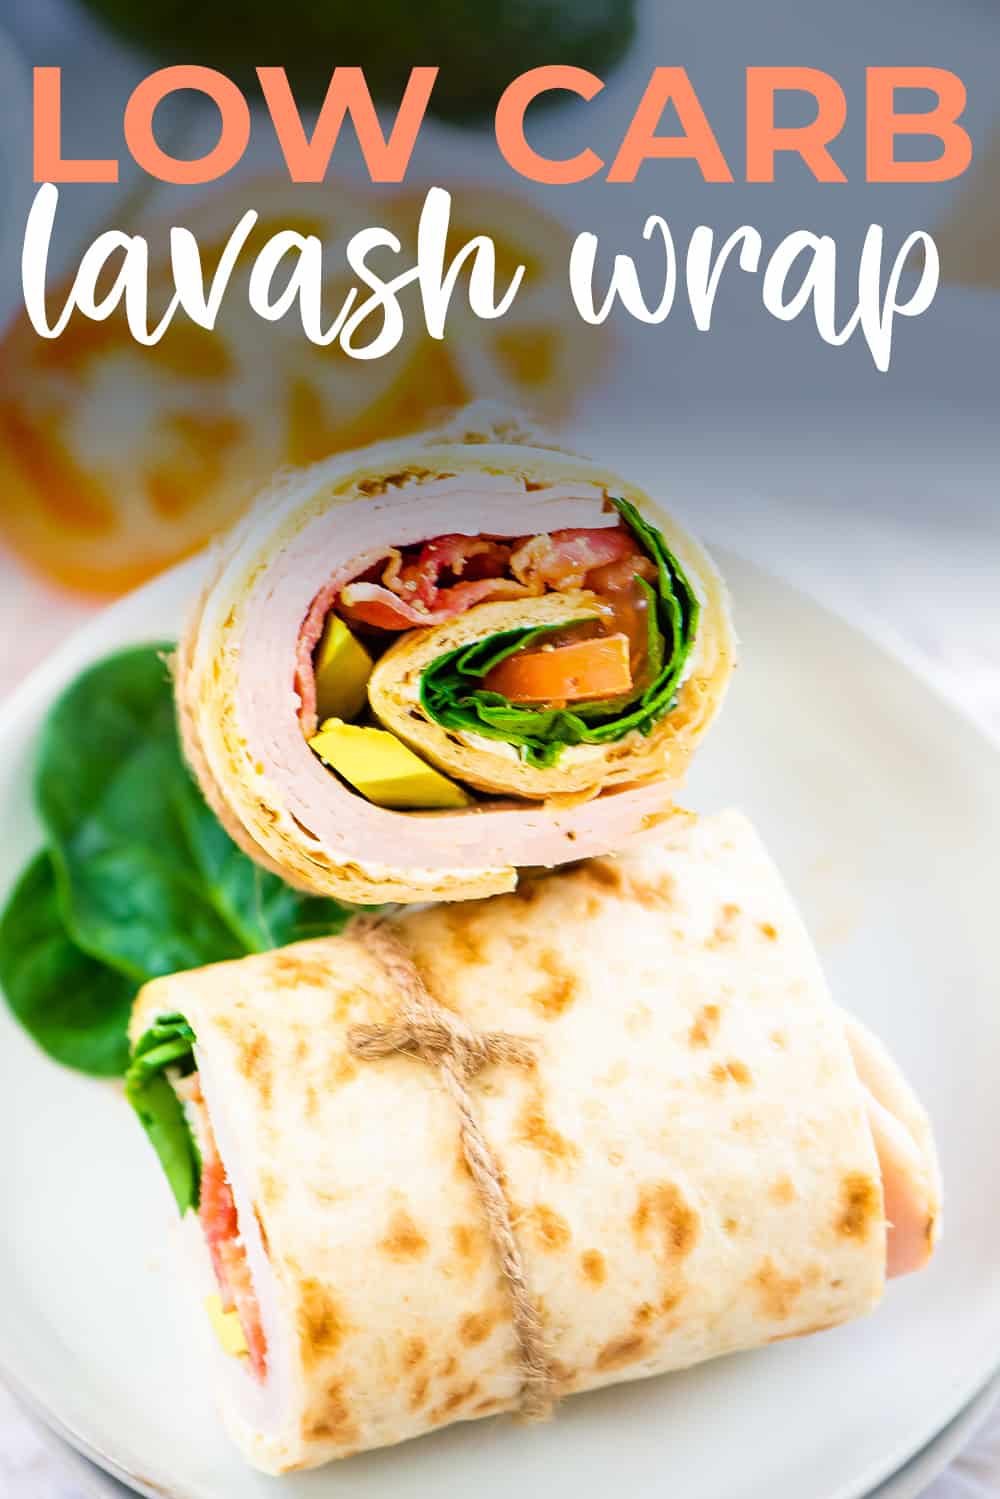 Lavash wraps cut in half and stacked on white plate.